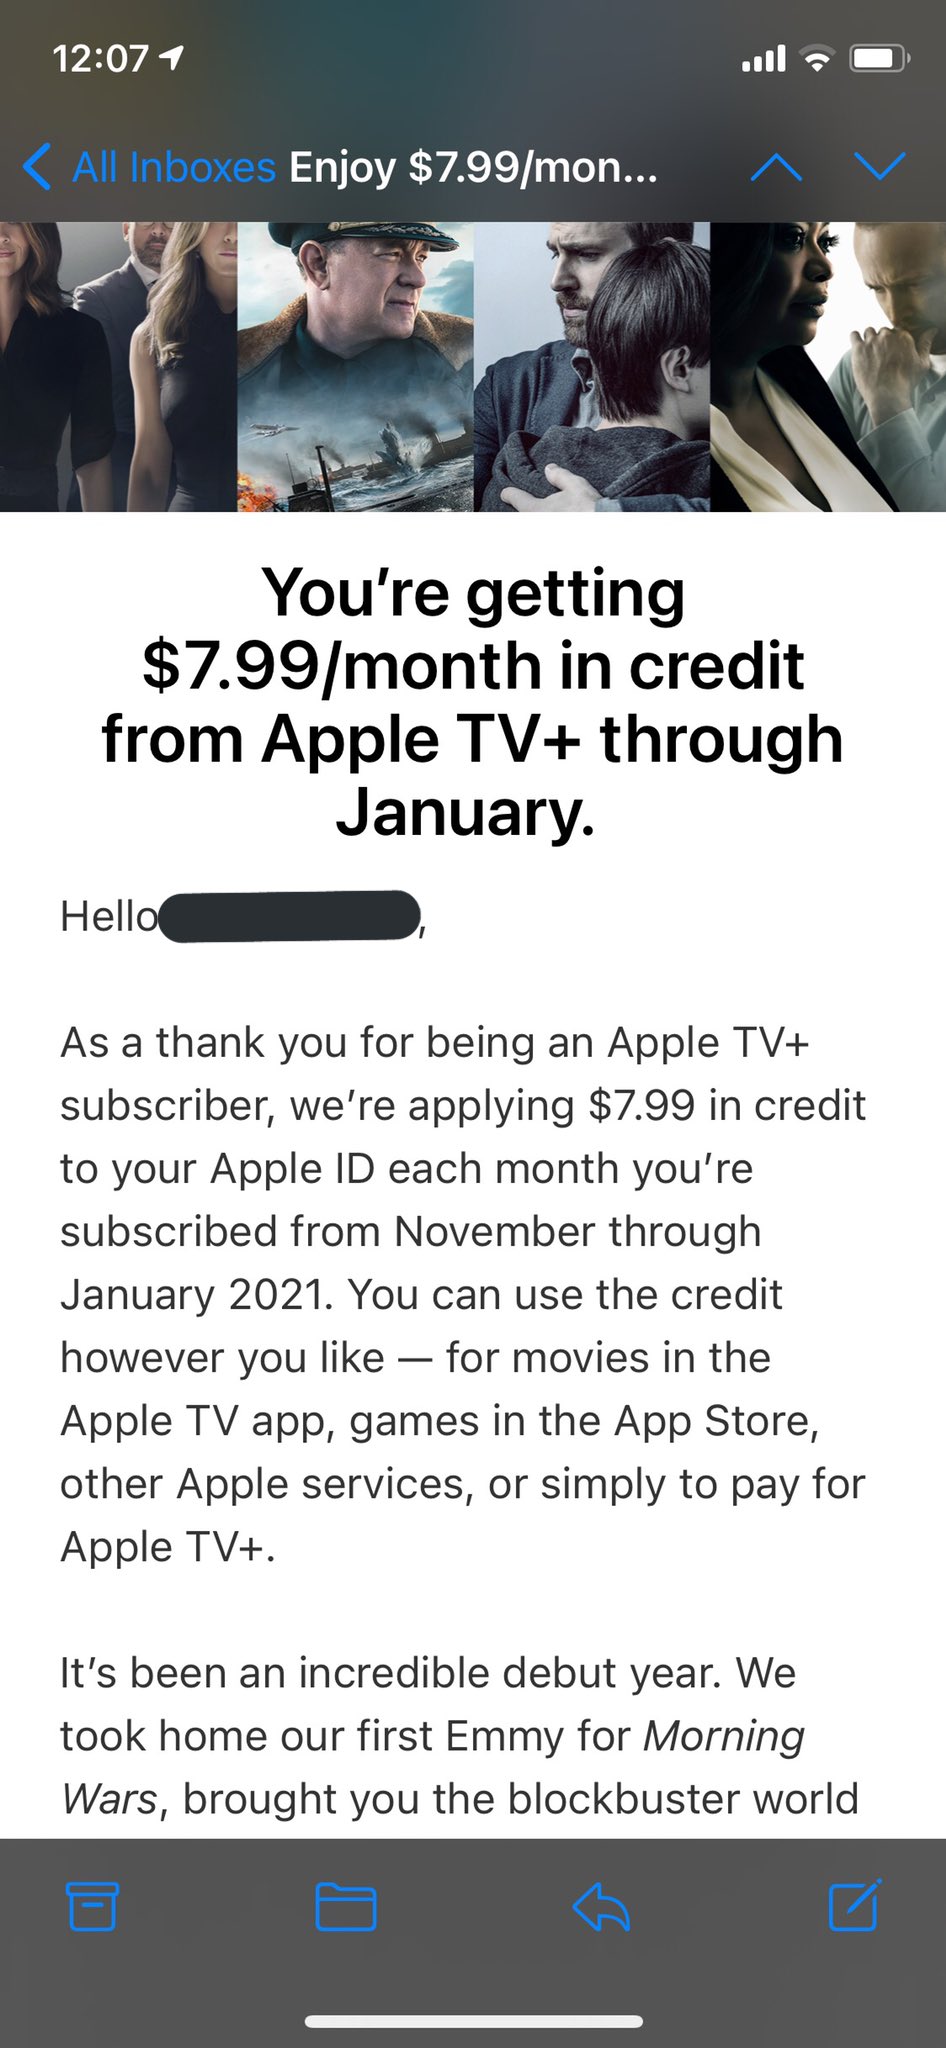 Apple Giving Monthly Credits To Apple TV+ Subscribers | Ubergizmo